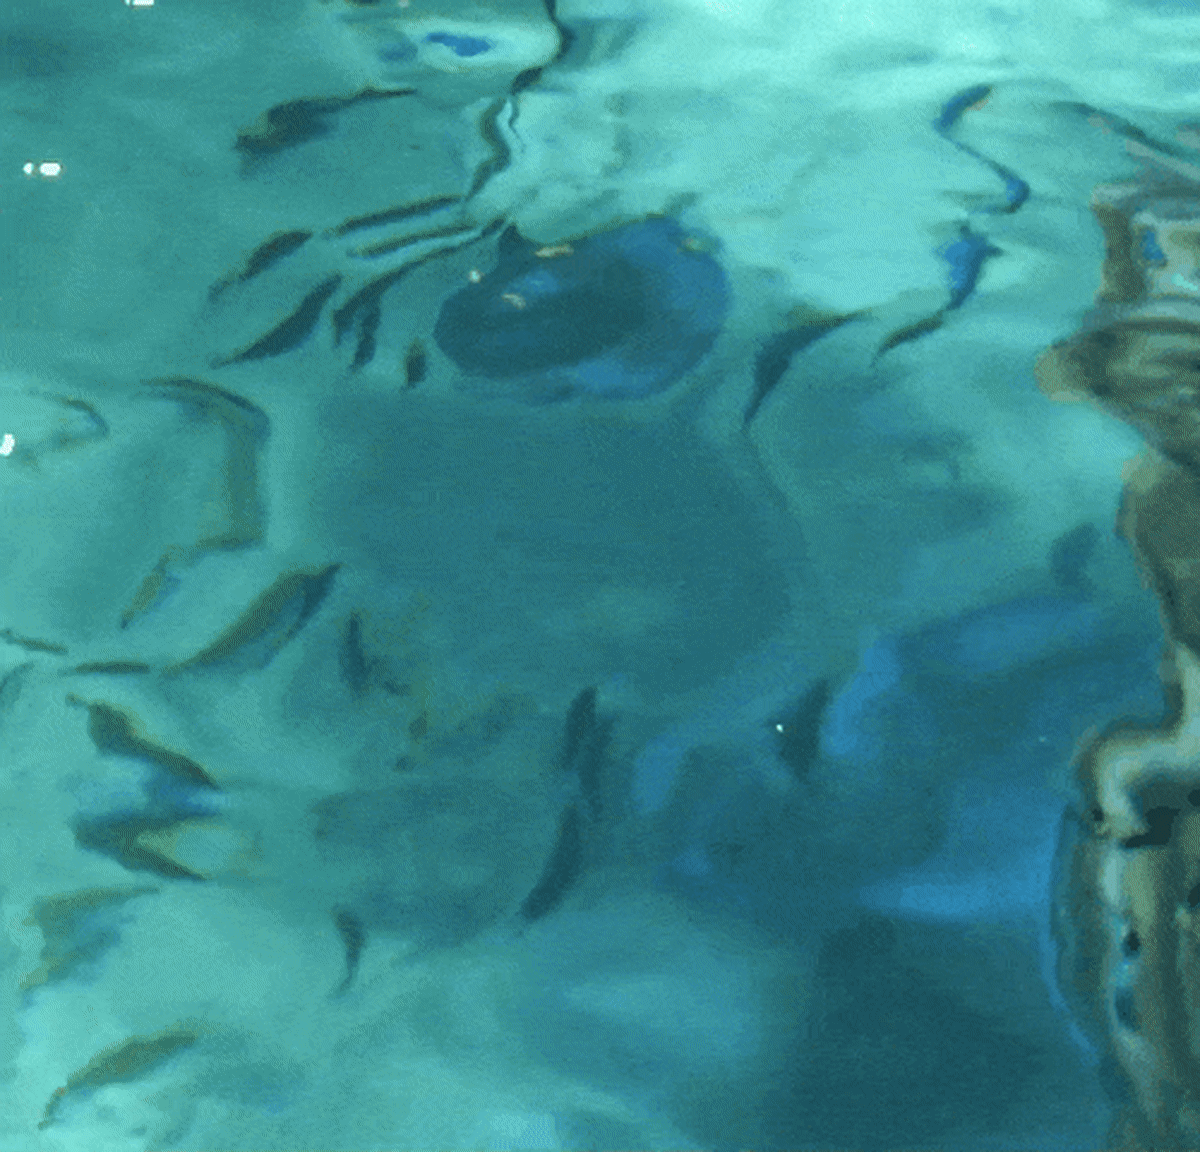 Shark GIF animation from a video I took at Ripley's Aquarium of Canada.